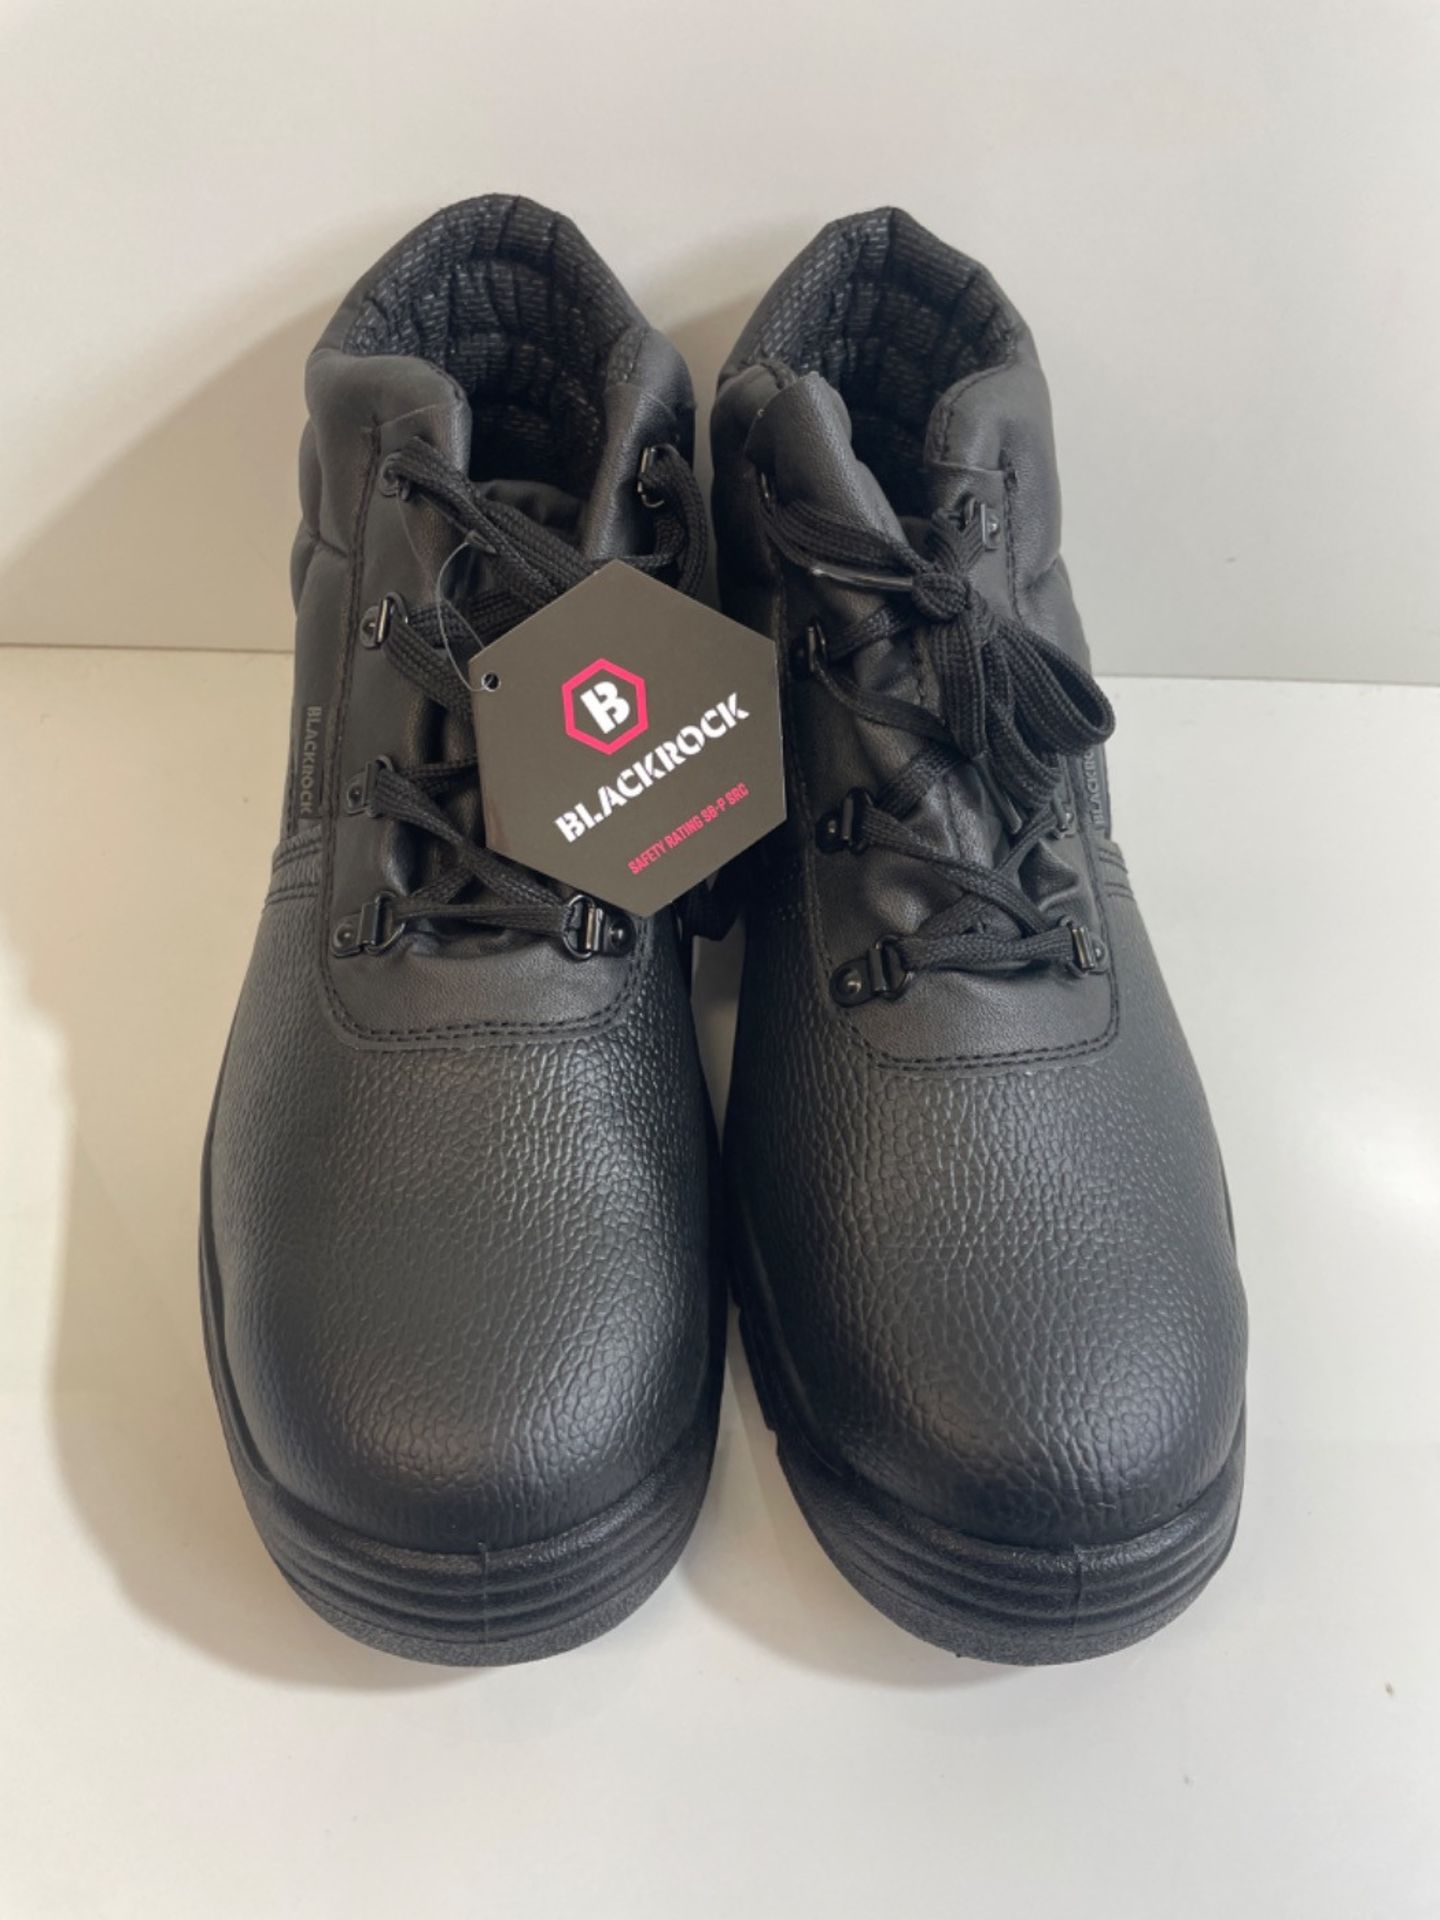 Blackrock Chukka Work Boots, Safety Boots, Safety Shoes Mens Womens, Men's Work & Utility Footwear, - Image 3 of 3